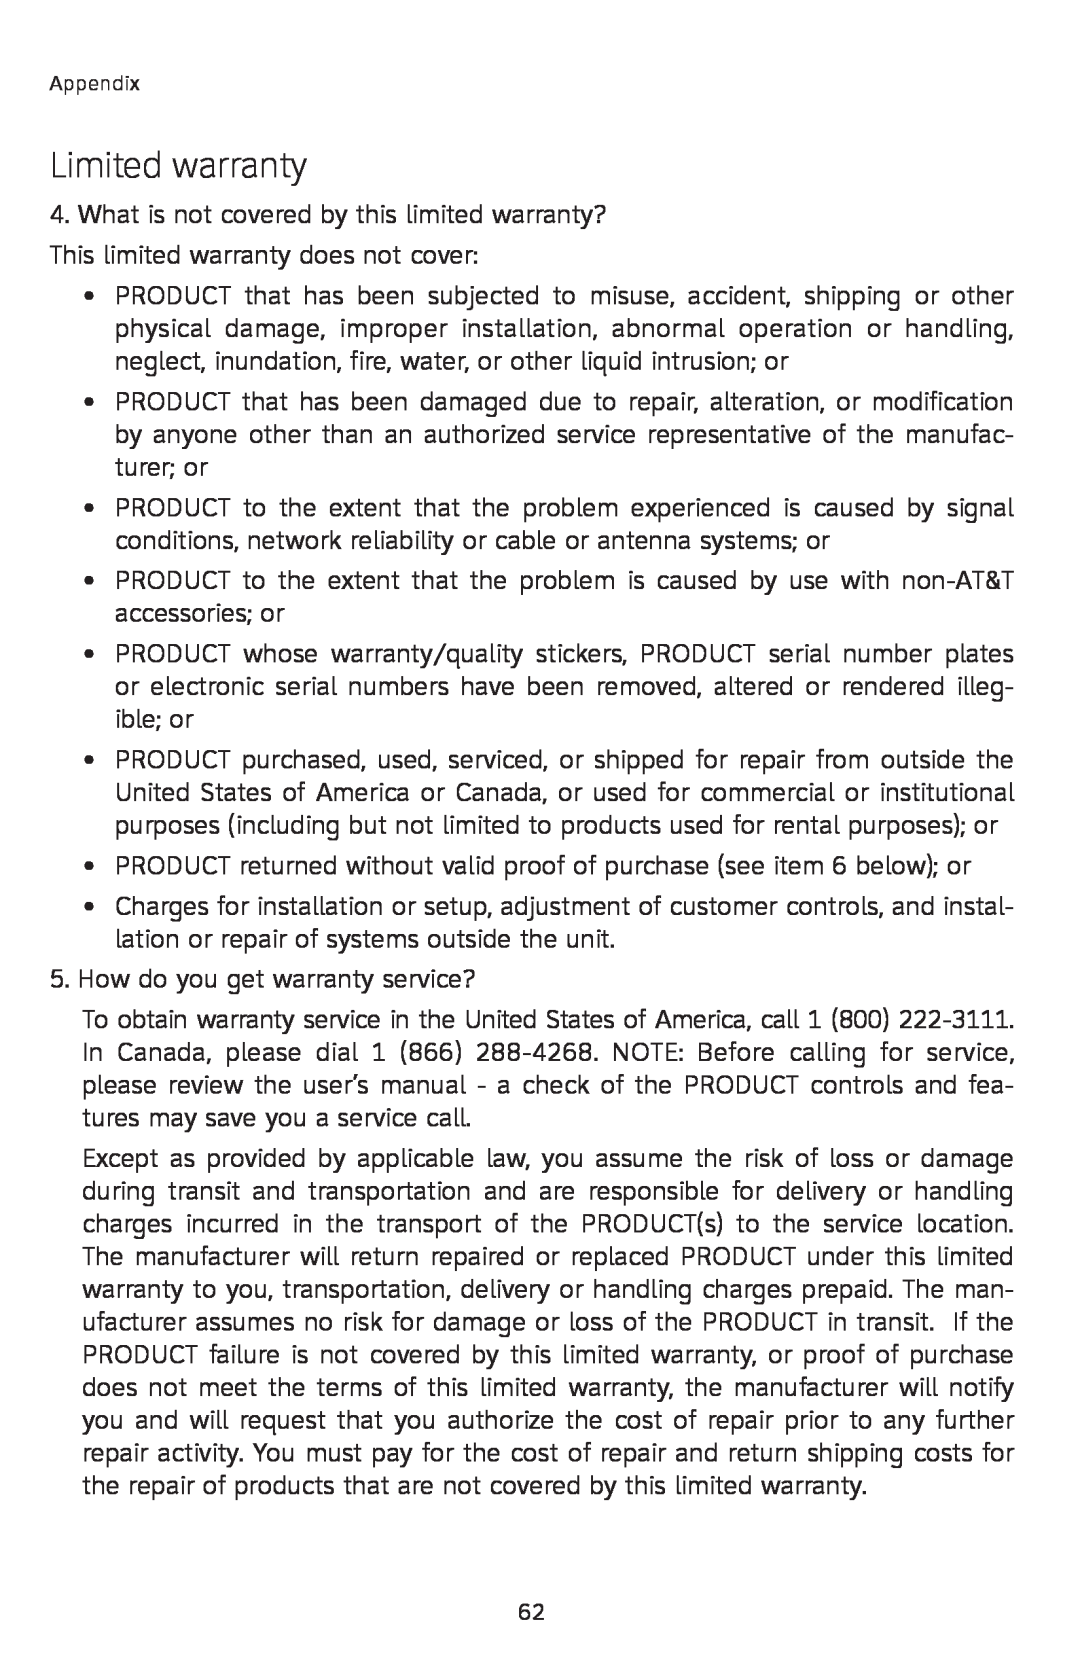 AT&T E2912 user manual Limited warranty, PRODUCT returned without valid proof of purchase see item 6 below or 